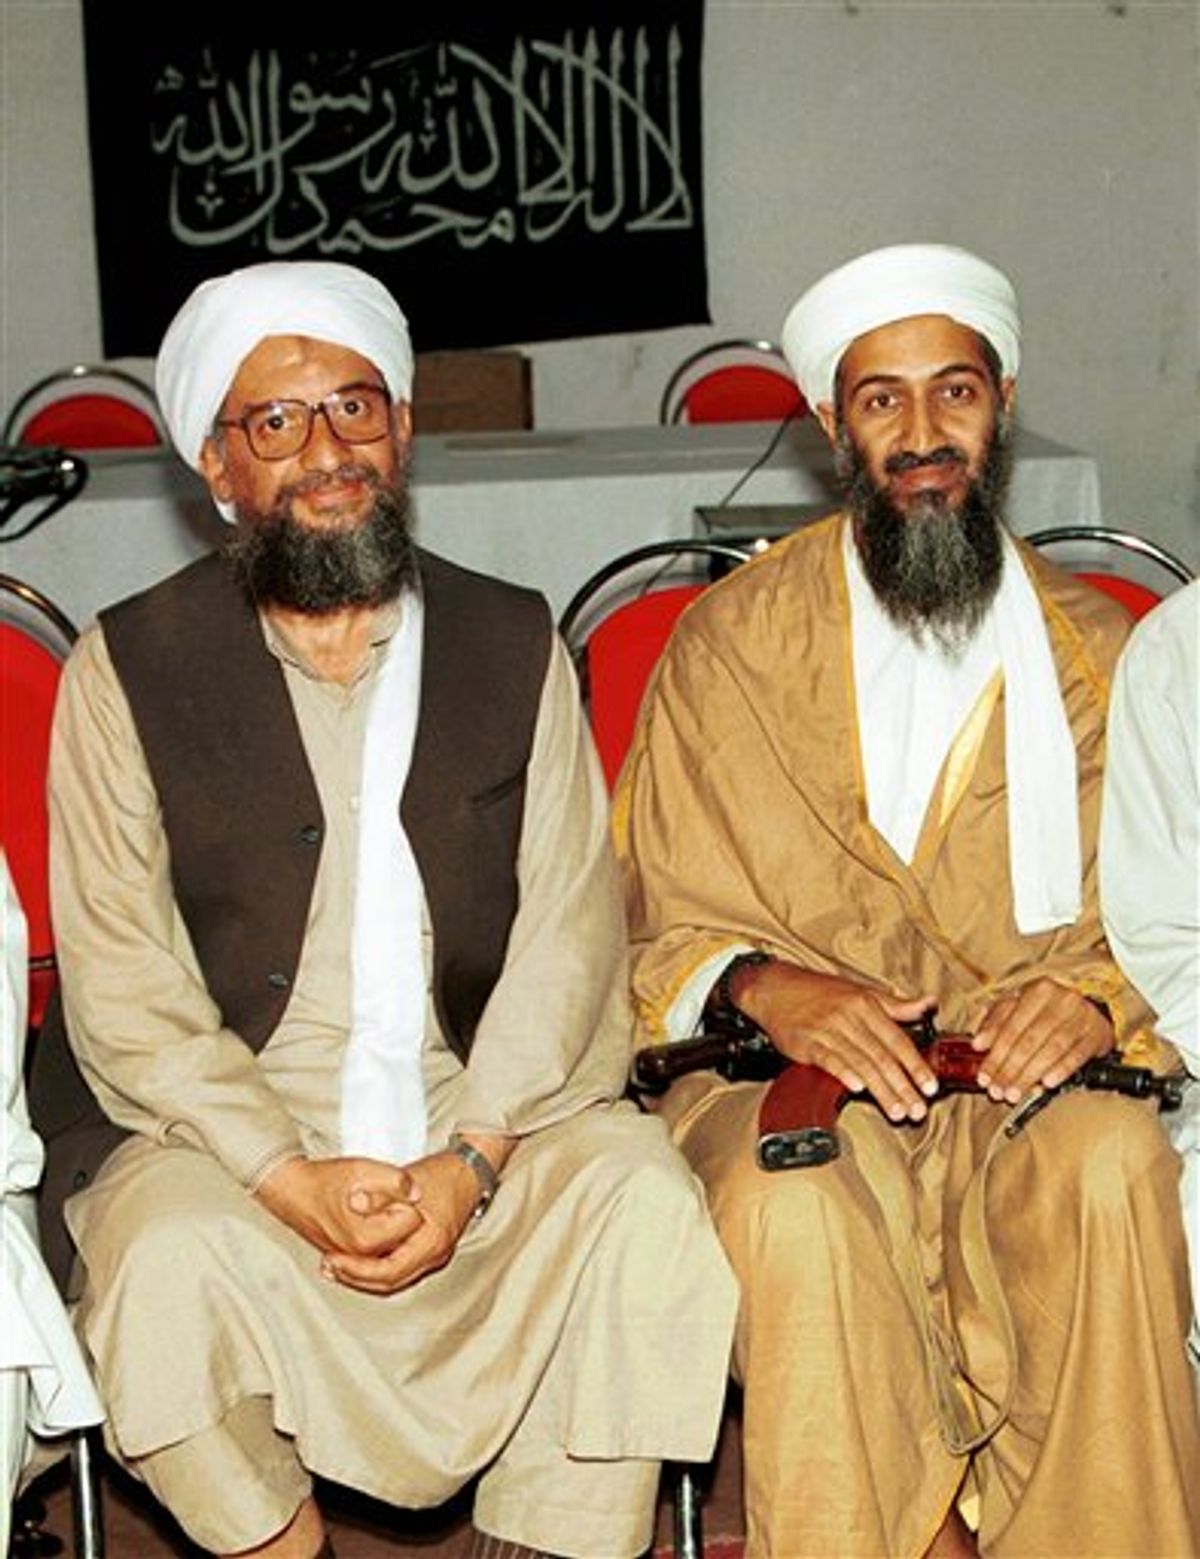 FILE - In this 1998 file photo made available Friday, March 19, 2004, Ayman al-Zawahri, left, poses for a photograph with Osama bin Laden, right, in Khost, Afghanistan. Al-Qaida has selected its longtime No. 2, Ayman al-Zawahri, to succeed Osama bin Laden following last month's U.S. commando raid that killed the terror leader, according to a statement posted Thursday, June 16, 2011 on a website affiliated with the network. (AP Photo/Mazhar Ali Khan, File) (AP)